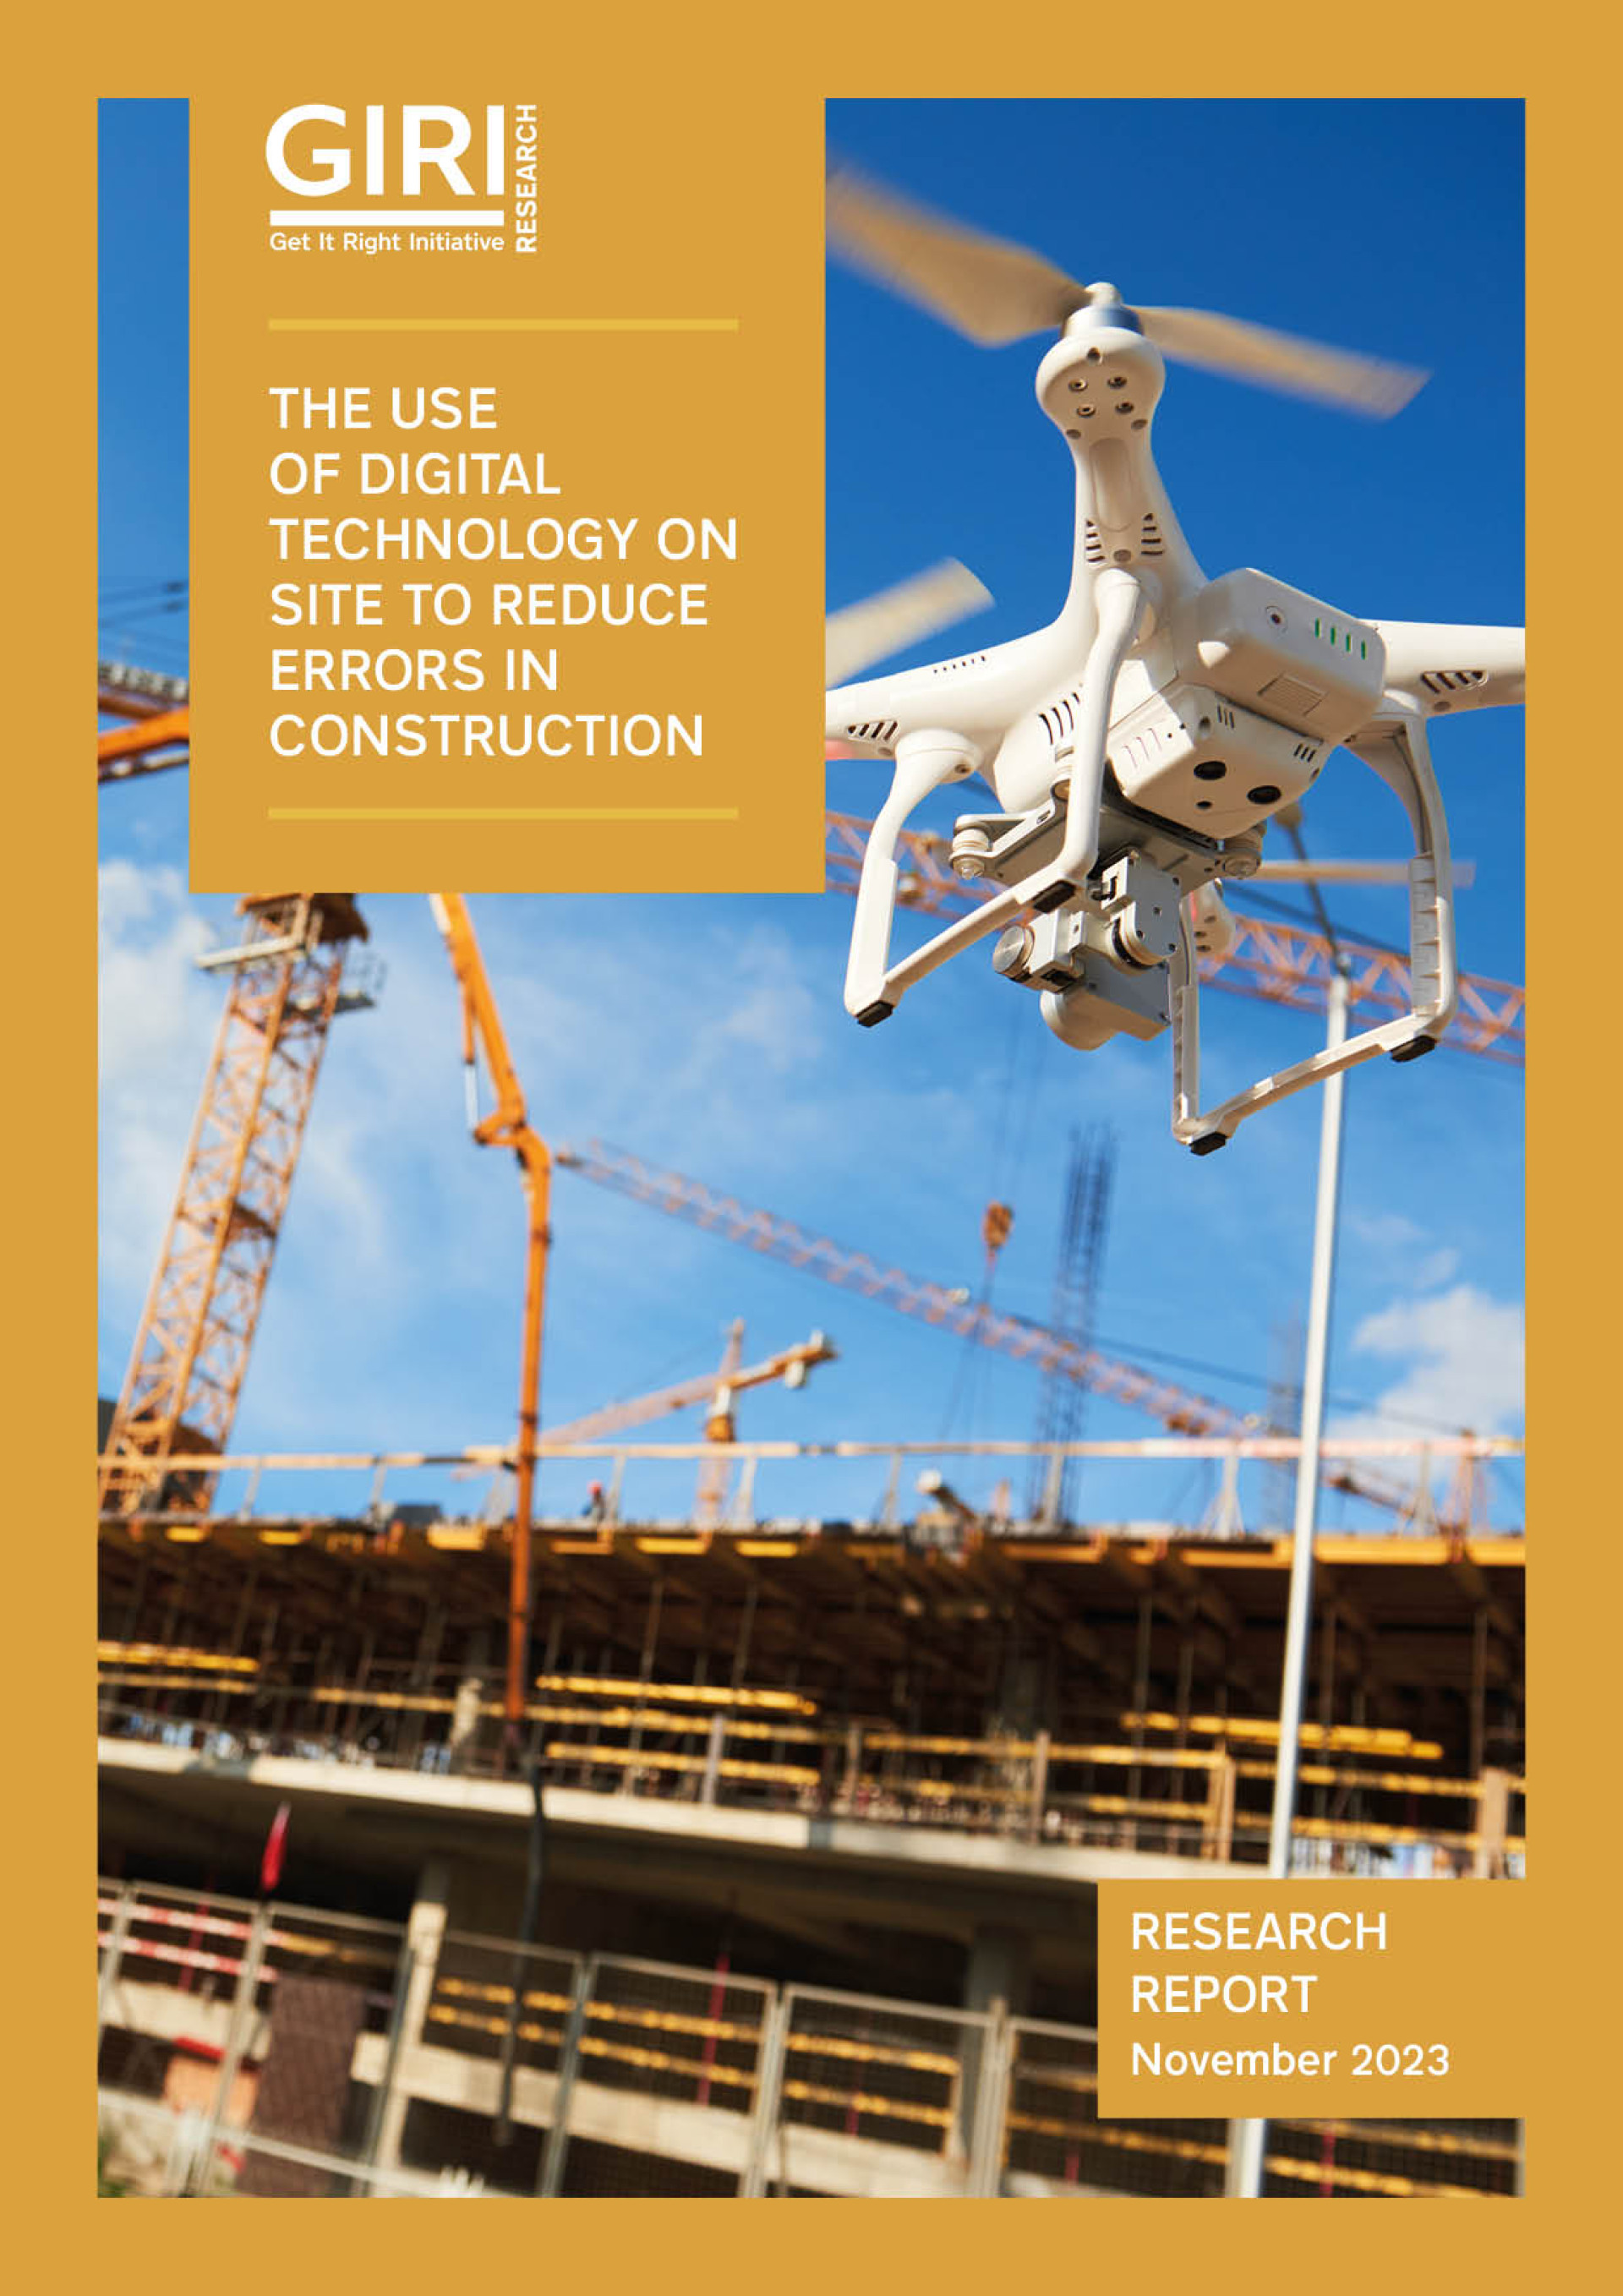 GIRI Research Report: The use of digital technology on site to reduce errors in construction